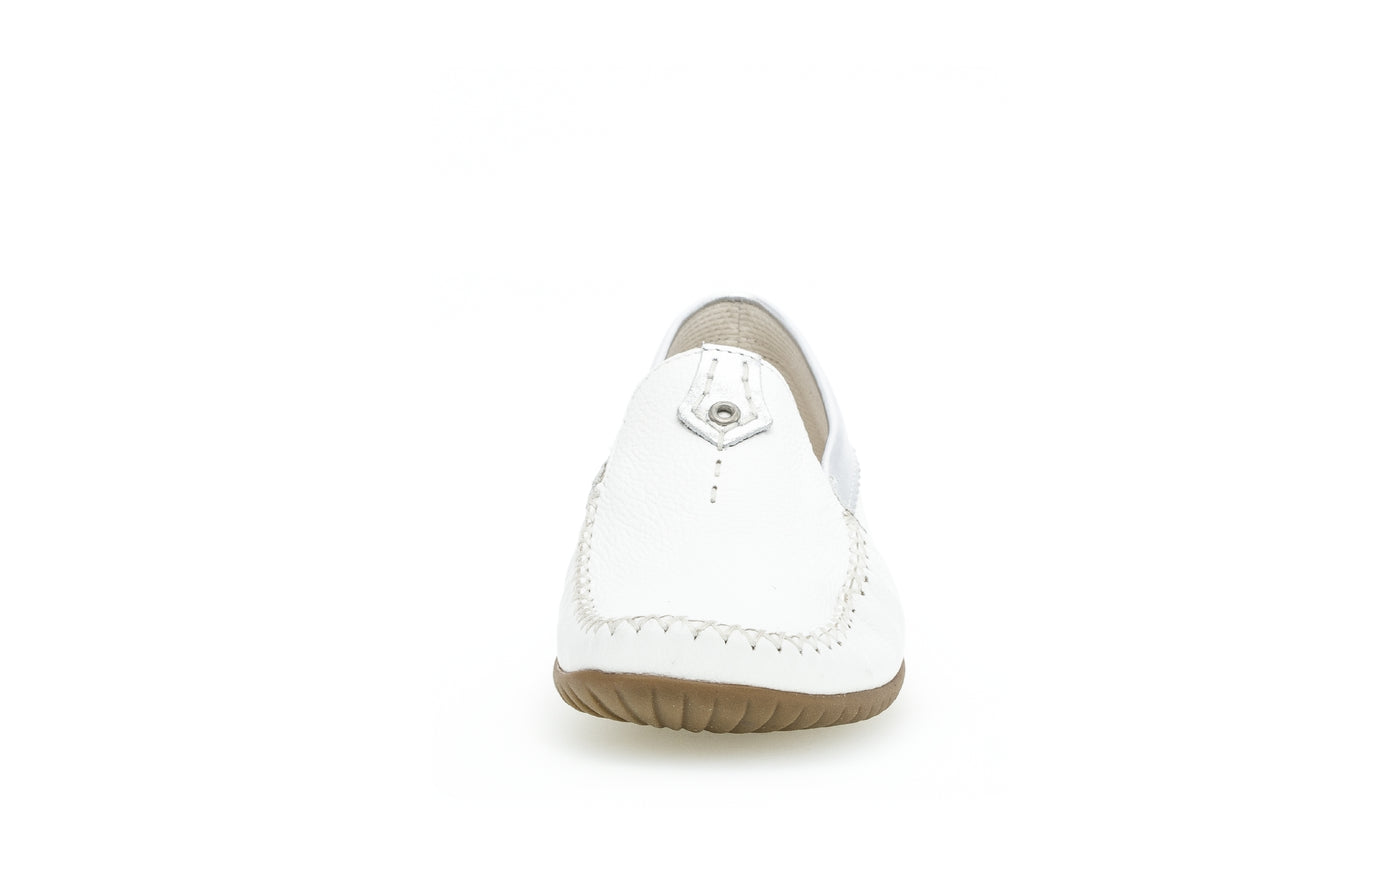 GABOR - 86.090.50 FLAT LOAFER - WHITE/SILVER